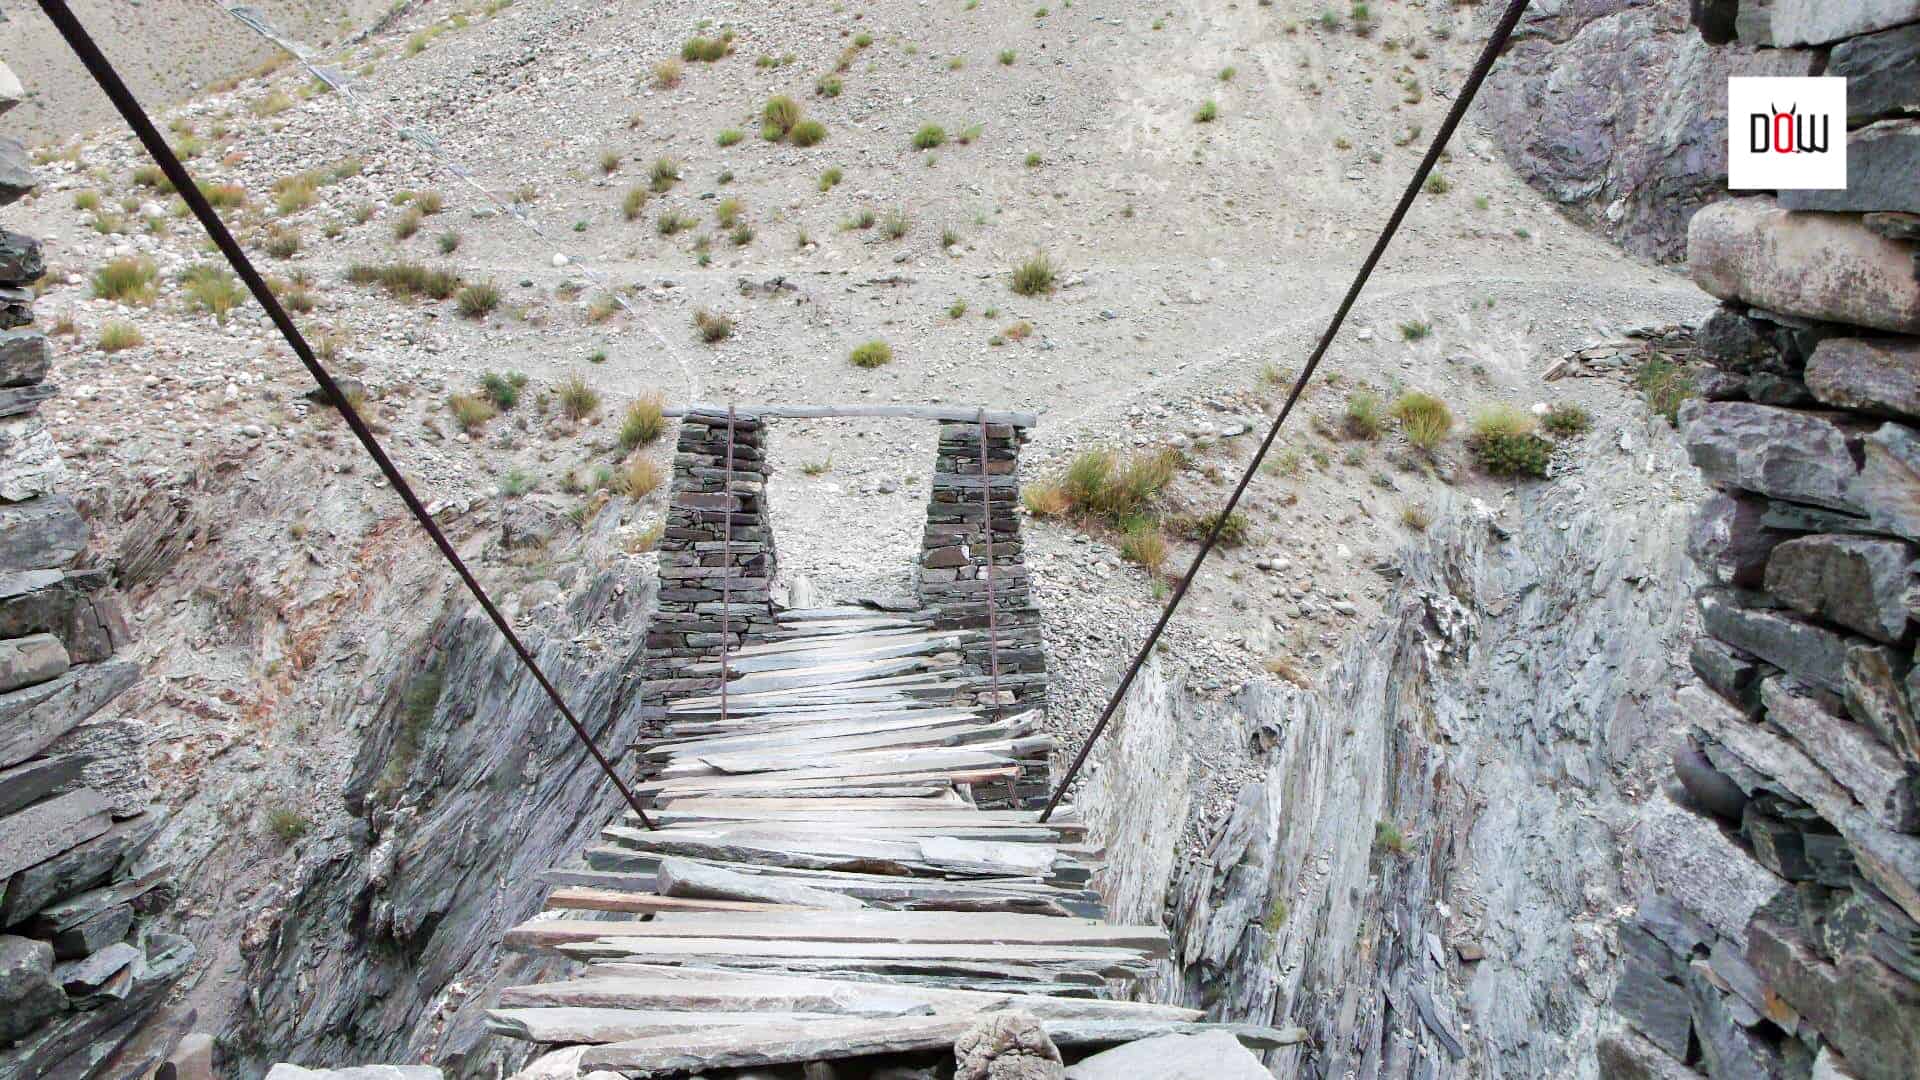 Another such hanging bridge